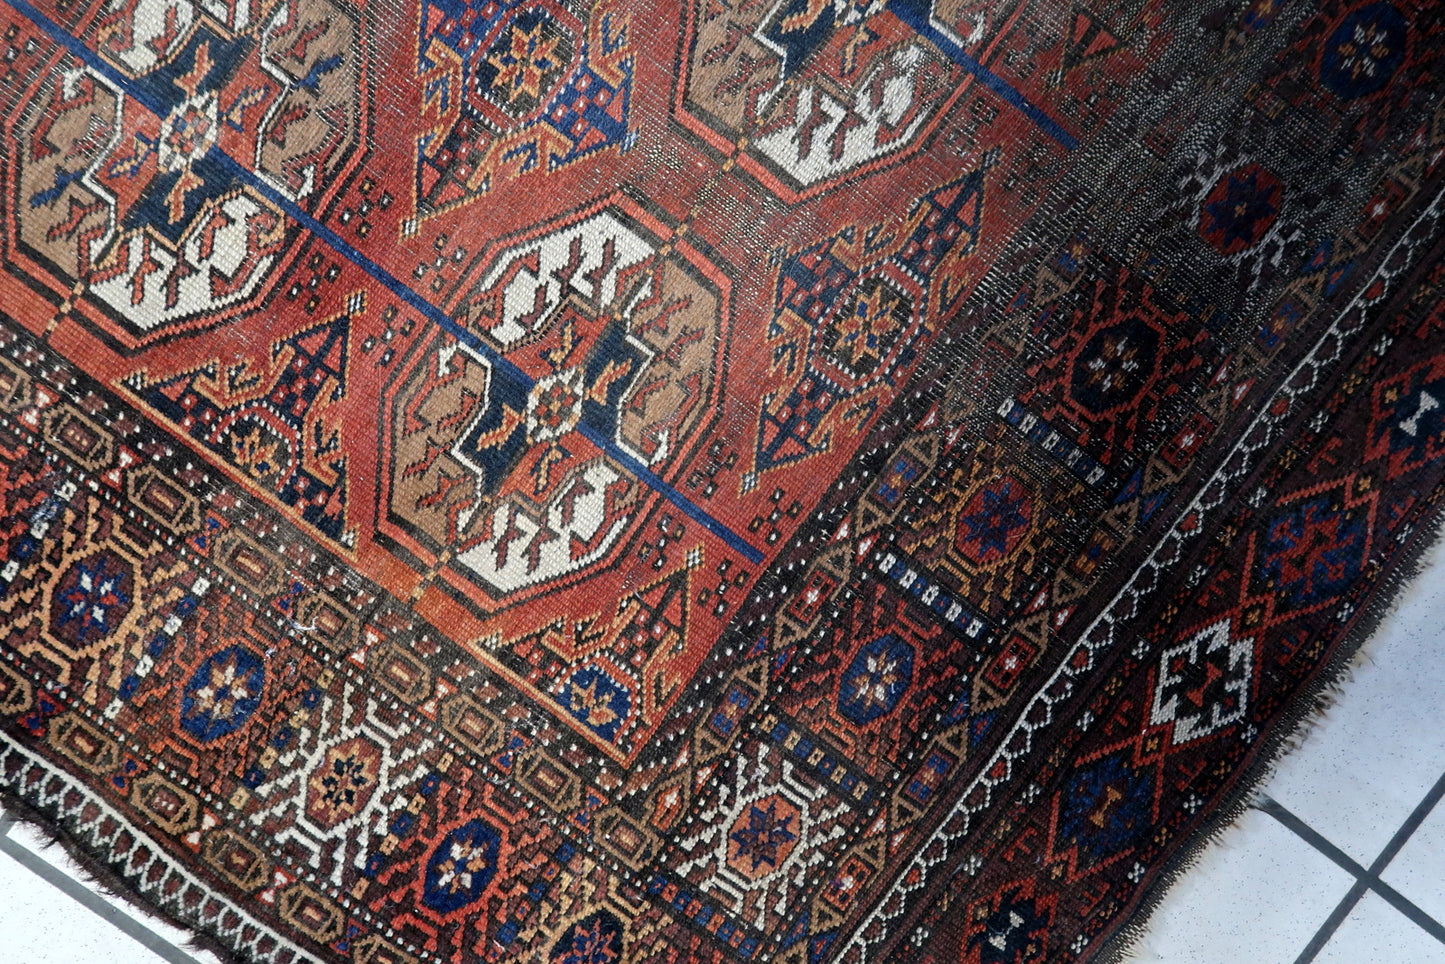 Close-up of Traditional Baluch Style Patterns on Afghan Rug